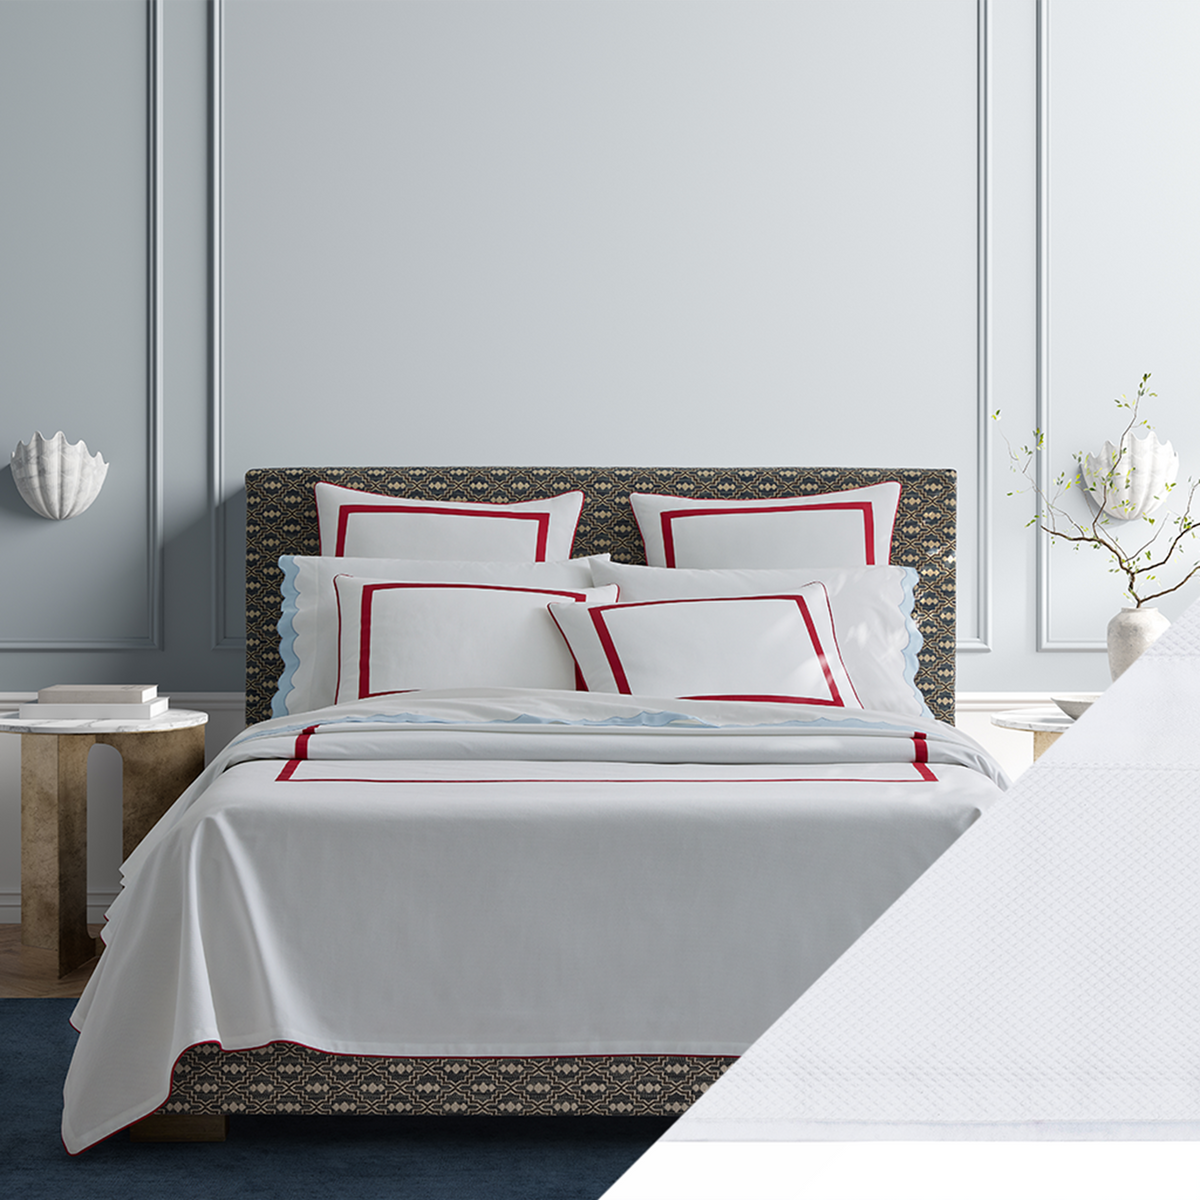 Bed Dressed in Matouk Louise Pique Bedding with Swatch in Color White